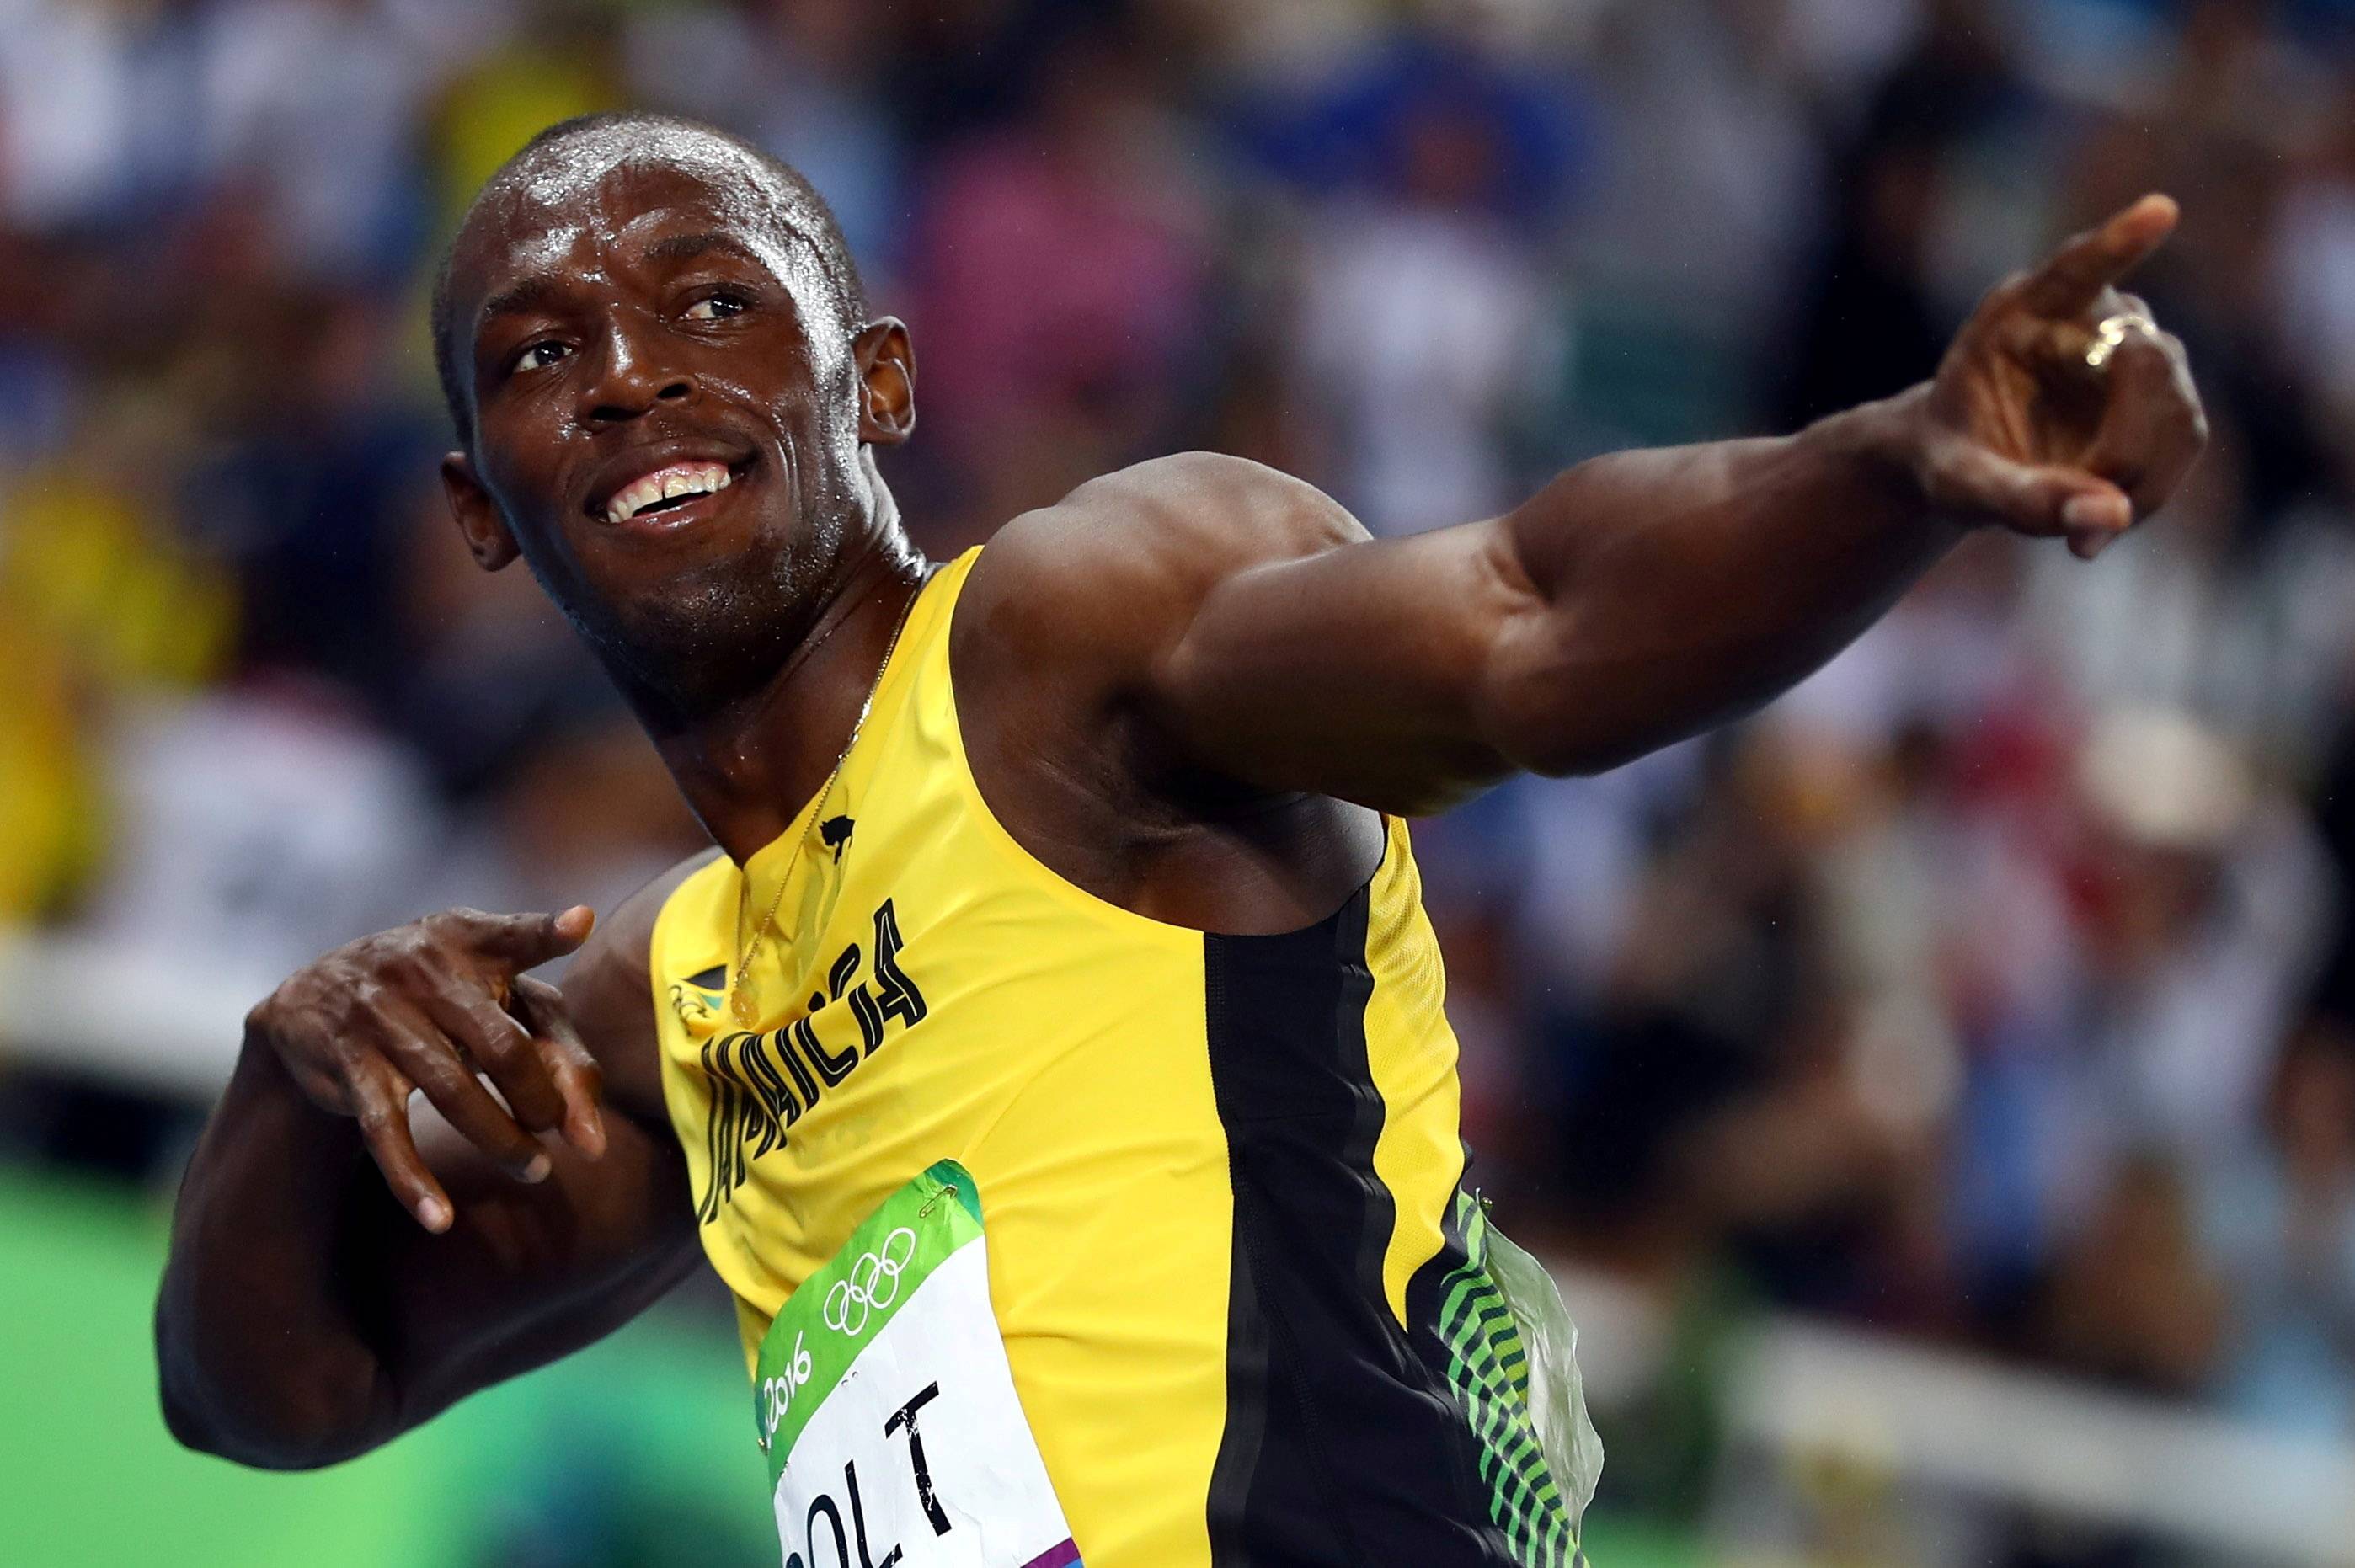 Who can fill the track void left by Usain Bolt's retirement? - The ...